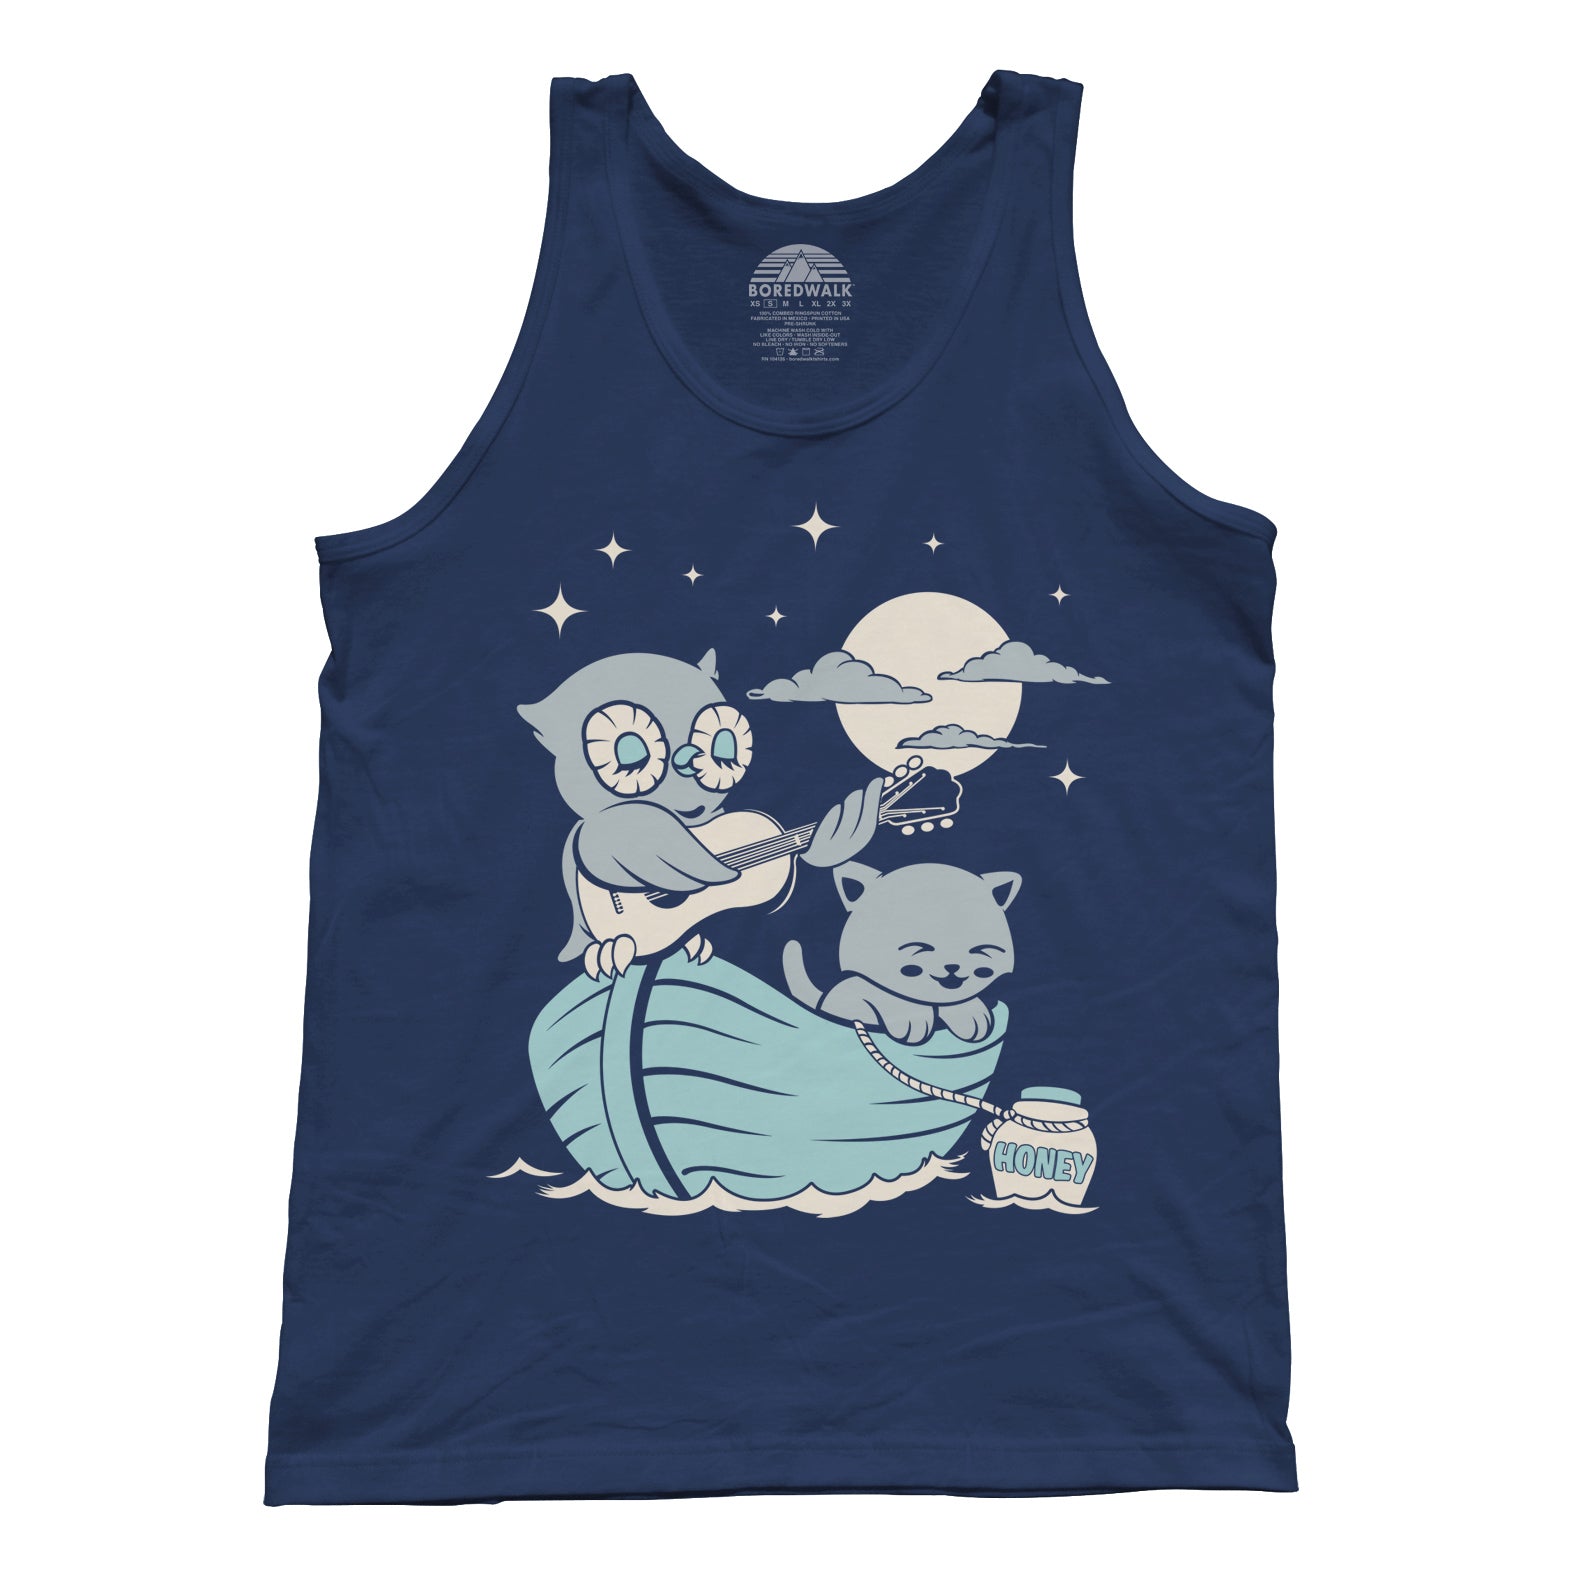 Unisex The Owl And the Pussycat Tank Top - By Ex-Boyfriend